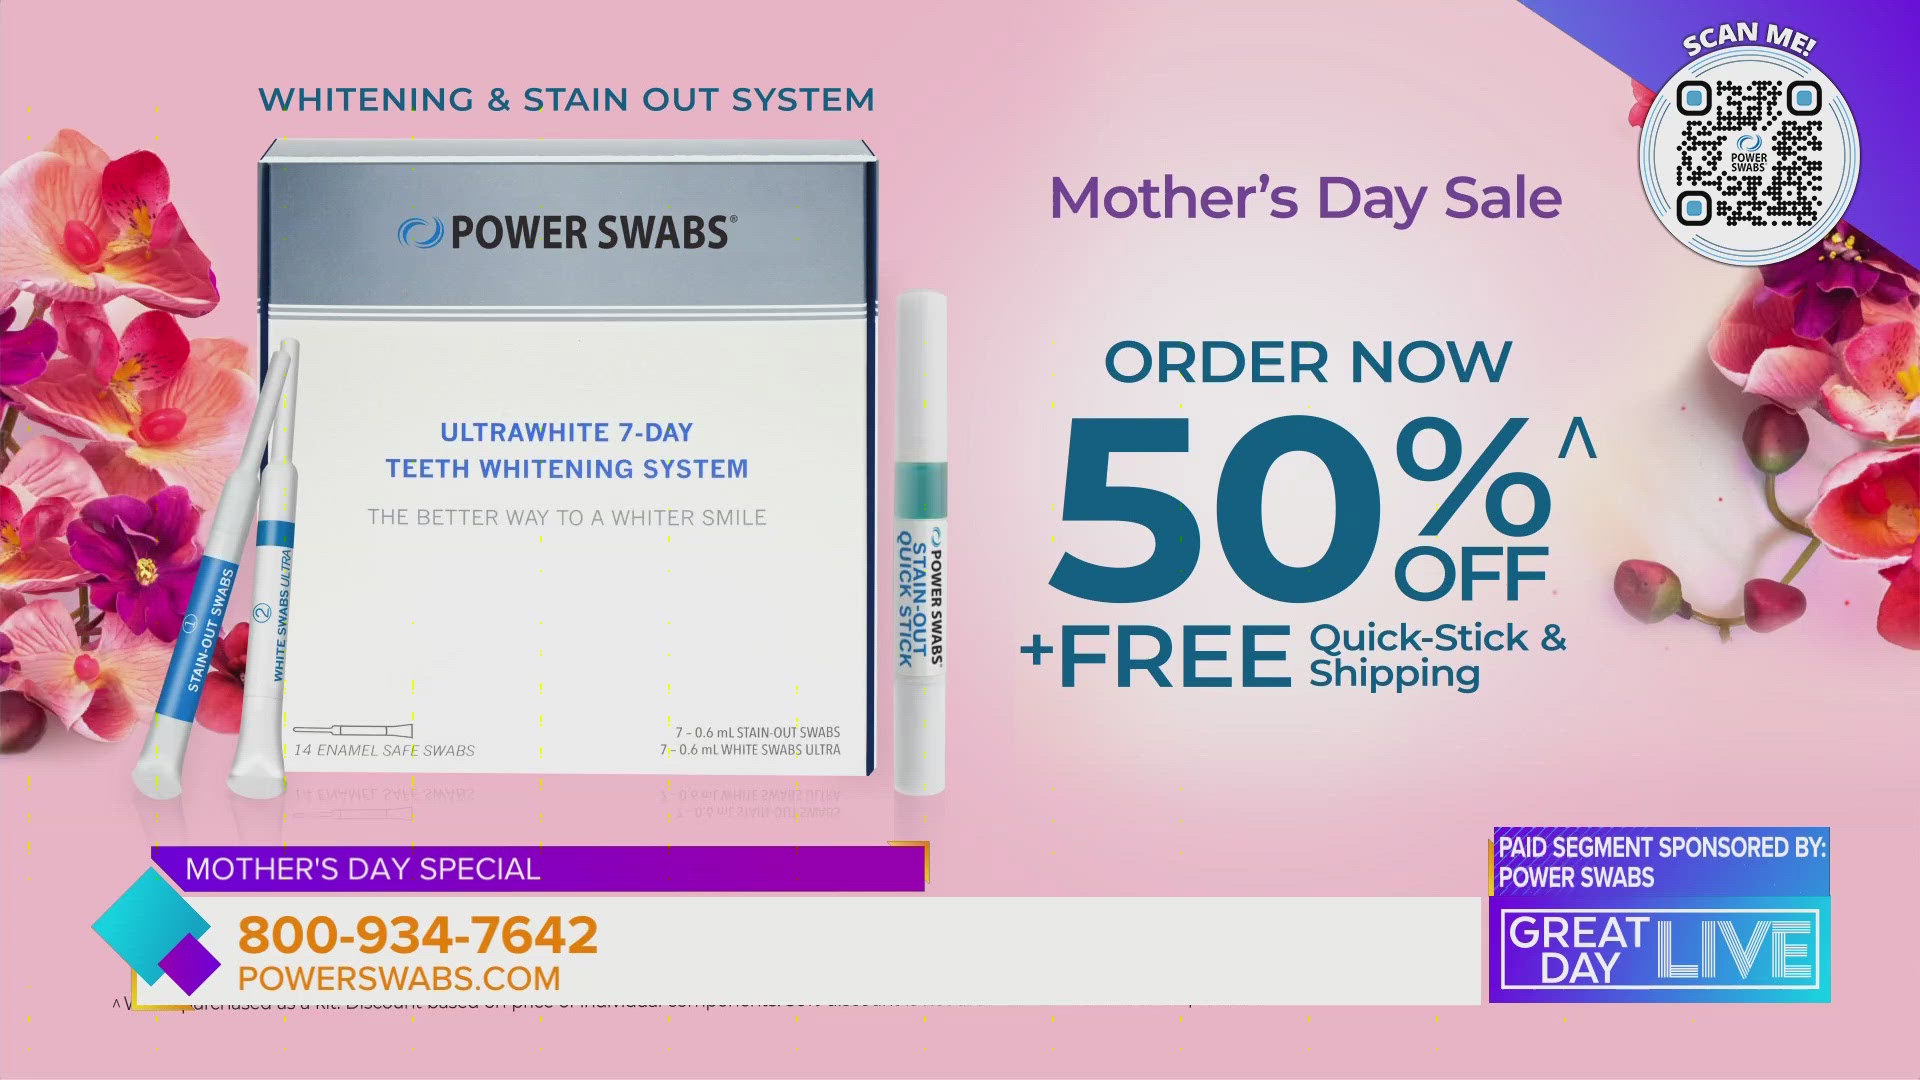 Get in on this mother’s day special with 50% off if you call 800-934-7642 or go to https://swabs.pw/3yt11Xr